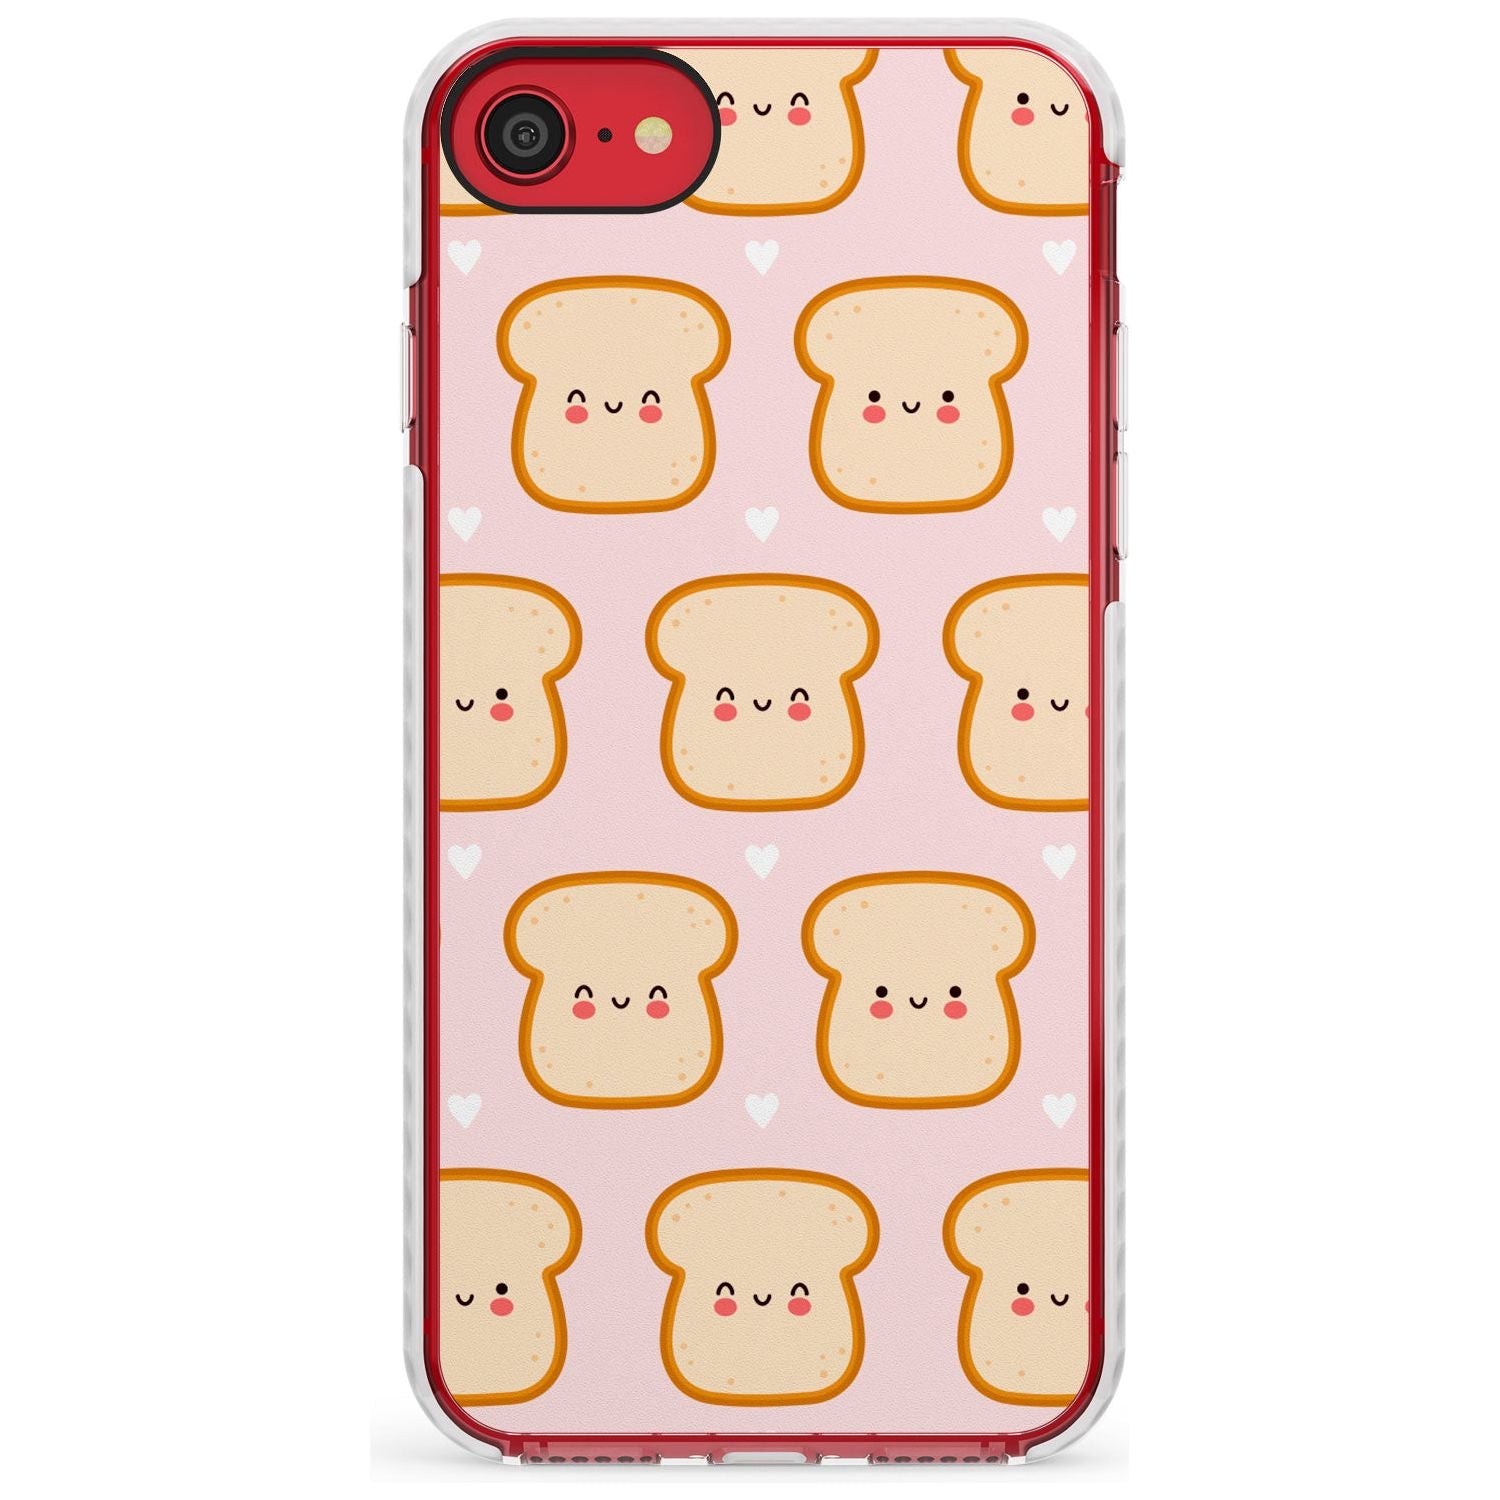 Bread Faces Kawaii Pattern Impact Phone Case for iPhone SE 8 7 Plus